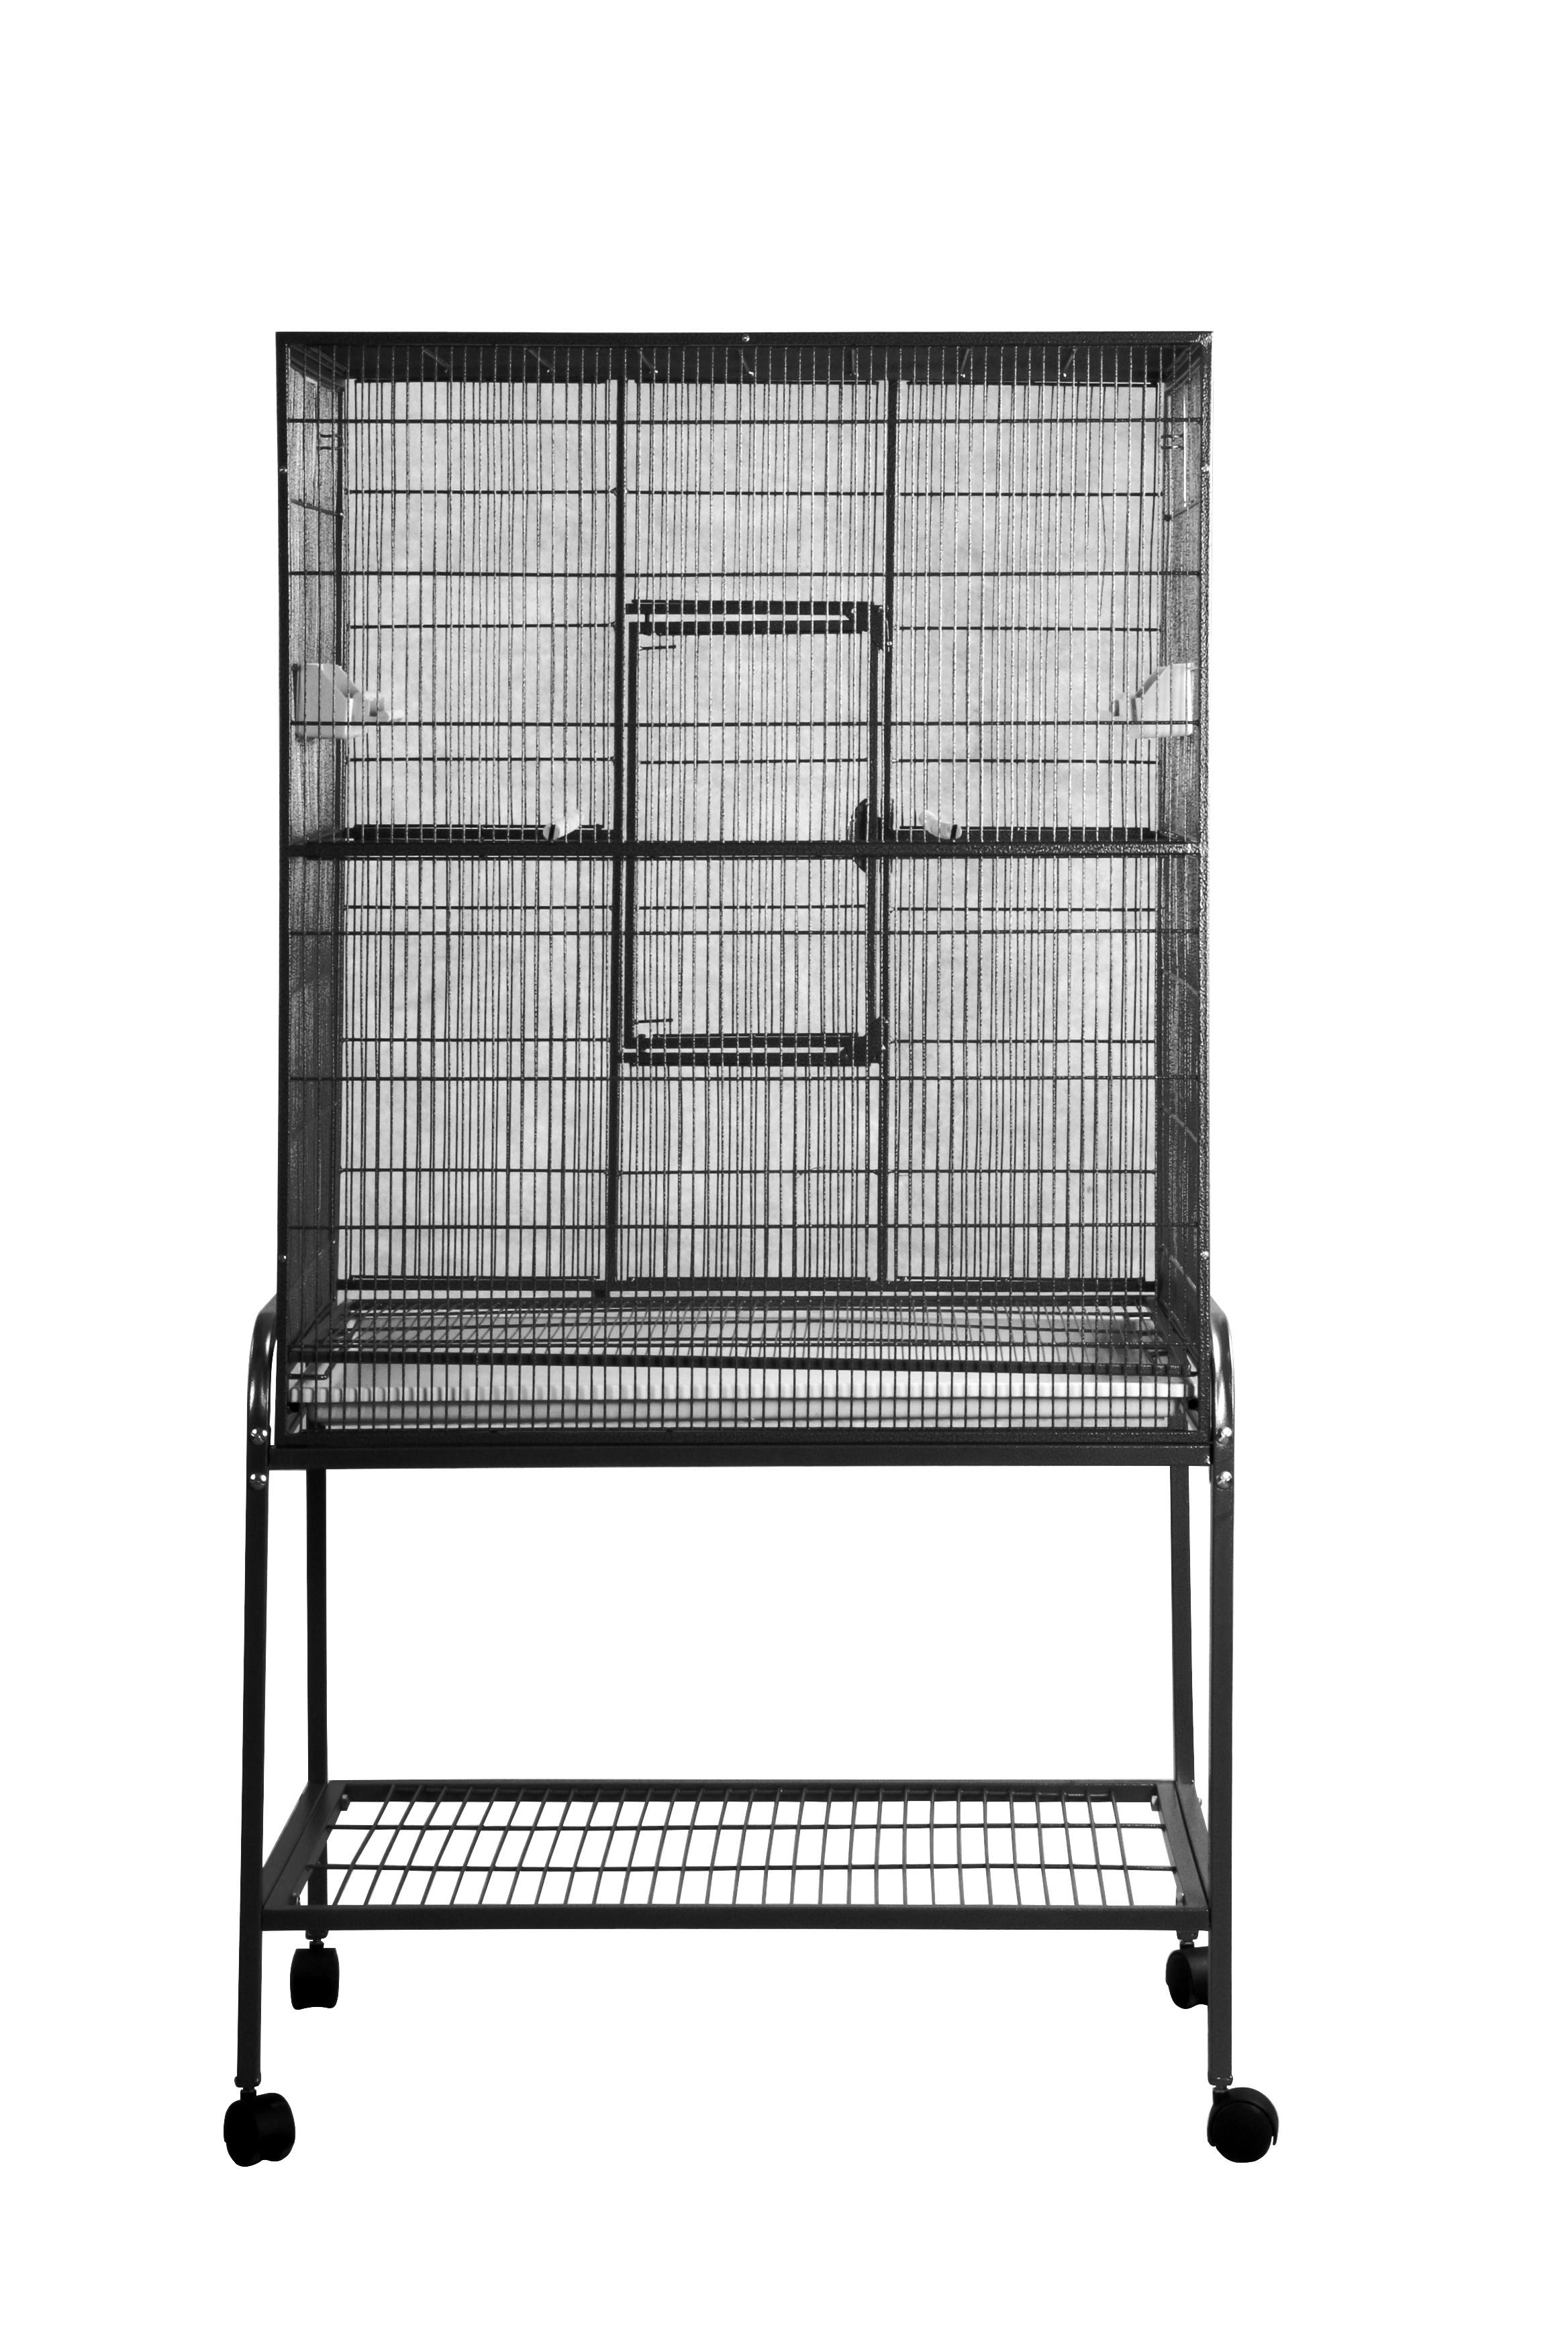 AE Flight Cage Stand